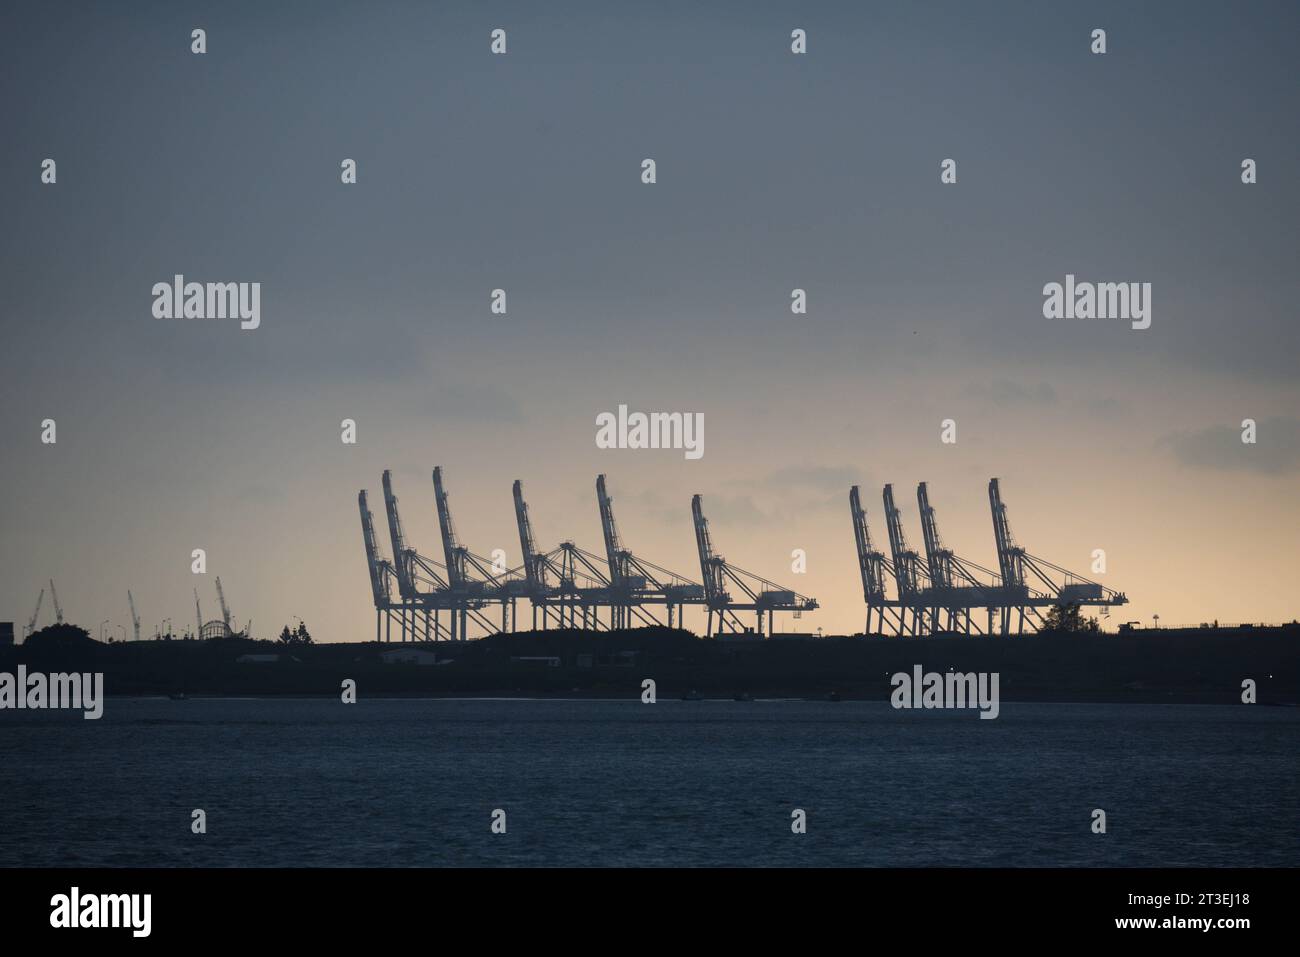 *** STRICTLY NO SALES TO FRENCH MEDIA OR PUBLISHERS - RIGHTS RESERVED ***October 03, 2023 - Tamsui, Taiwan: Silhouette of the cranes of the Port of Taipei, a strategic Taiwanese infrastructure located at the mouth of the Tamsui river. Stock Photo